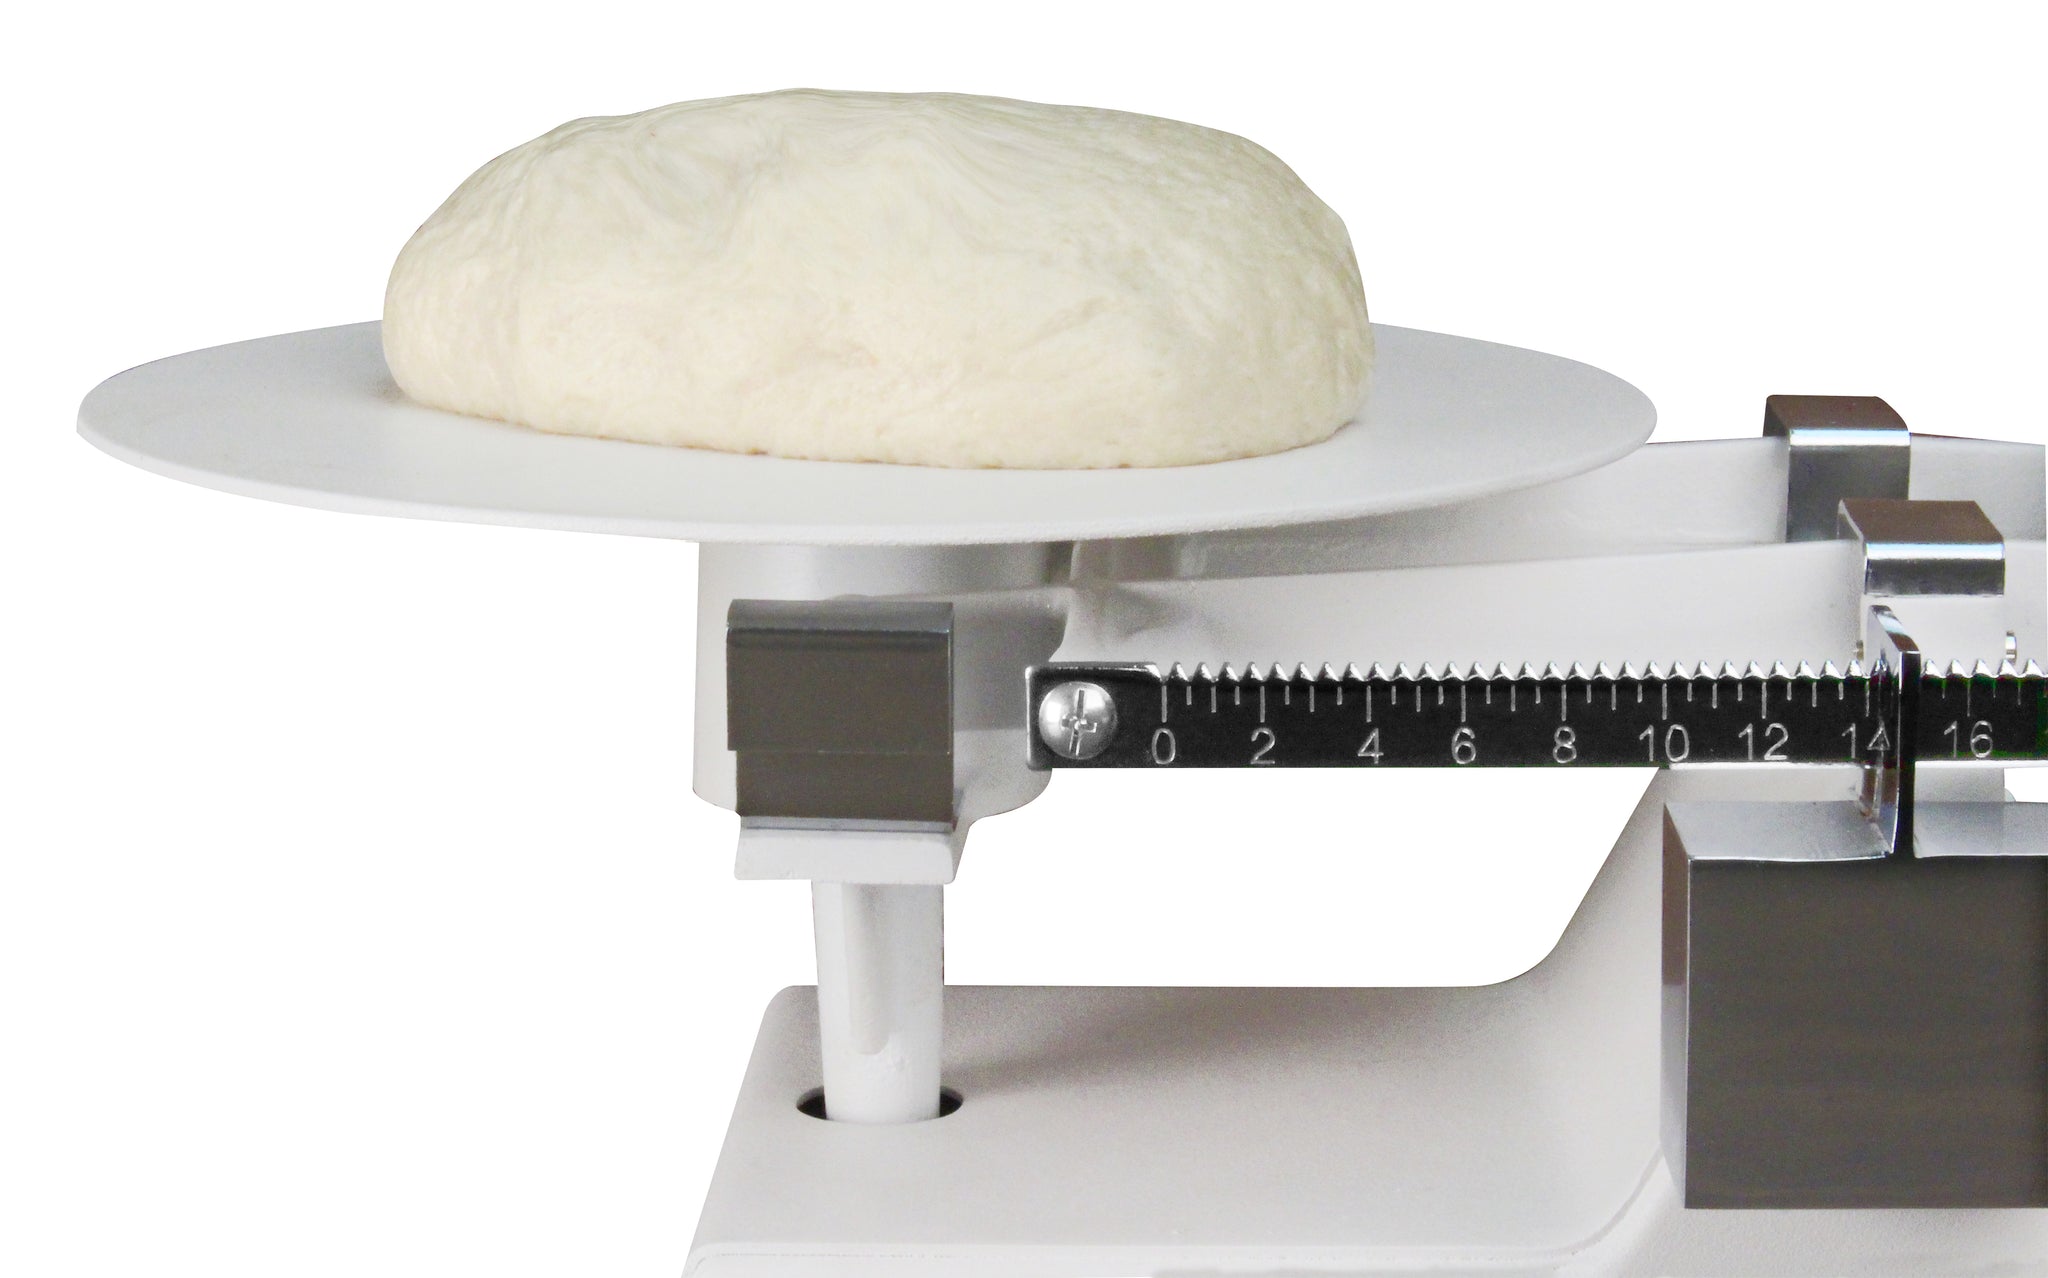 Baking Scales, Dough Scales, & Balance Scales